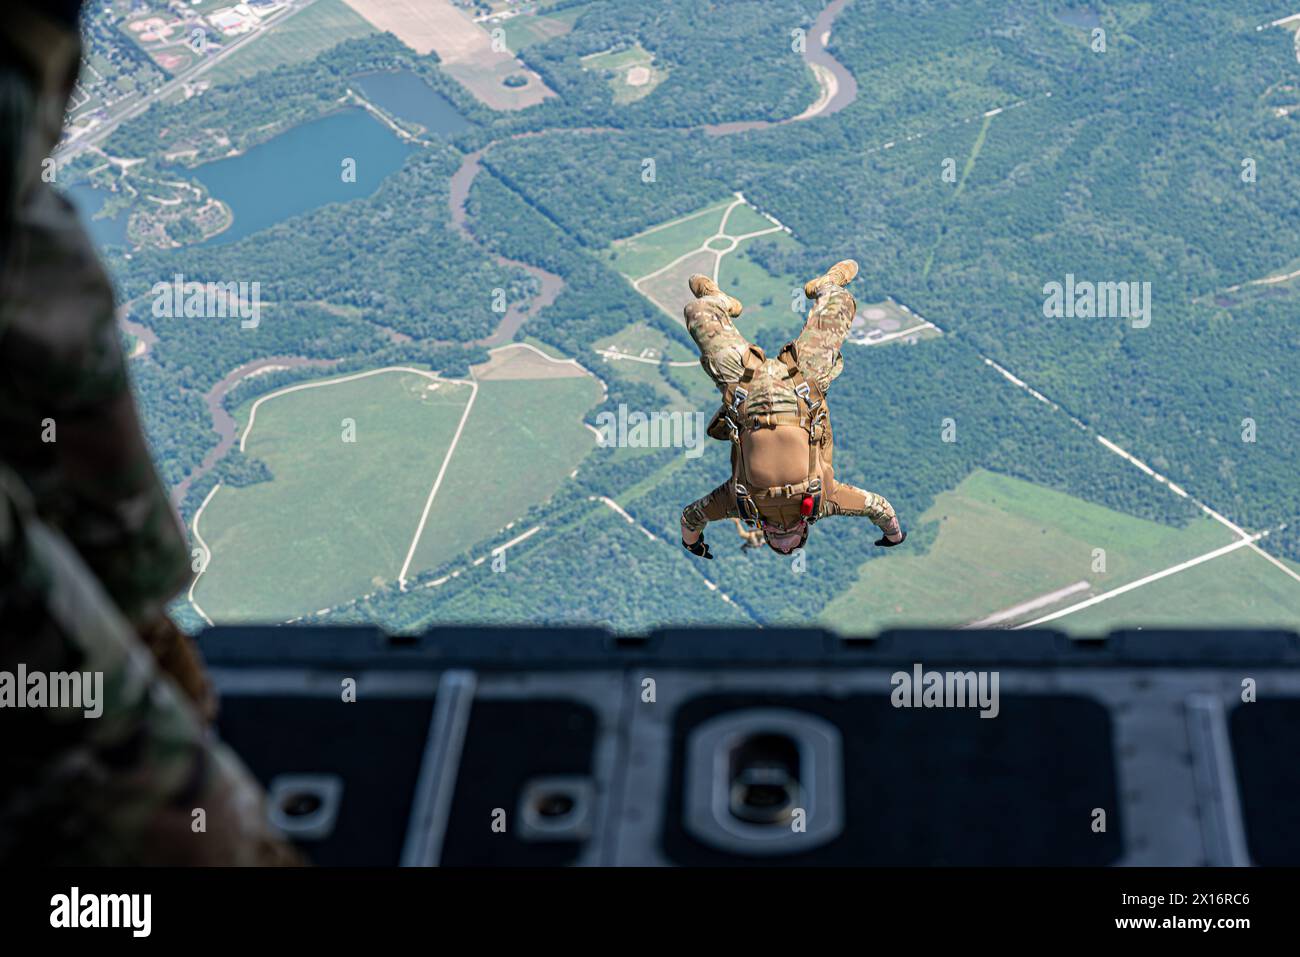 A man is doing a parachute jump from a plane. The scene is captured from the side of the plane Stock Photo